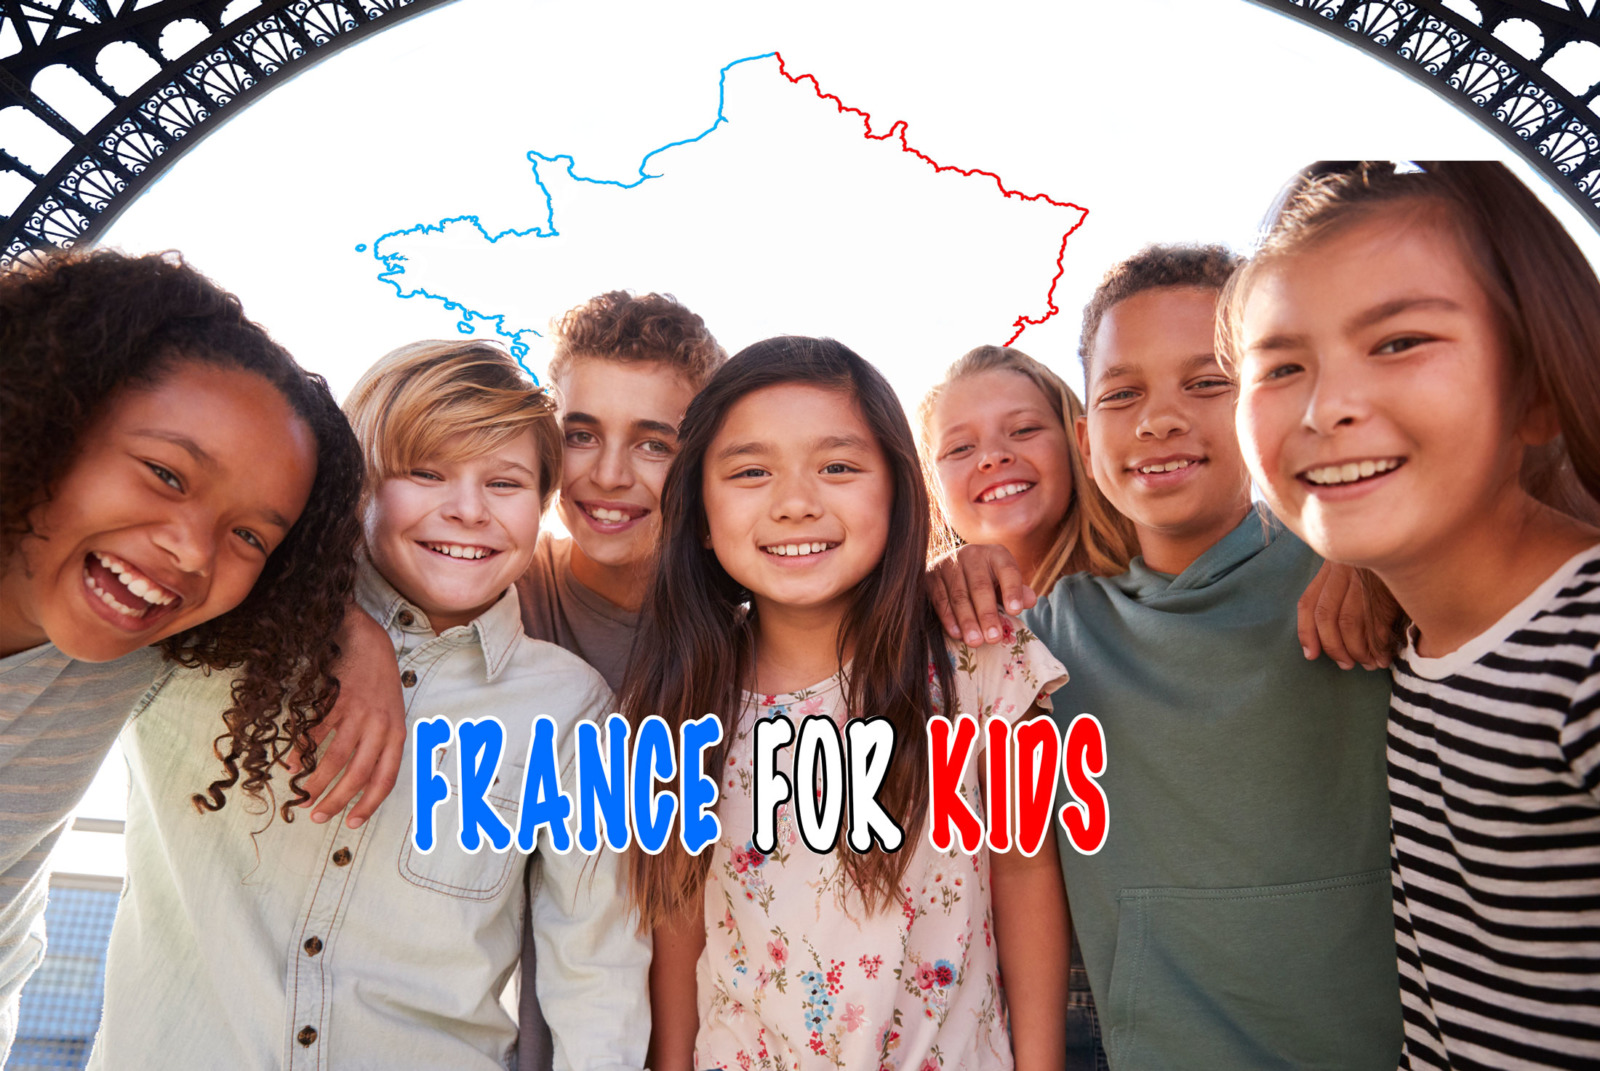 French for kids by French Moments